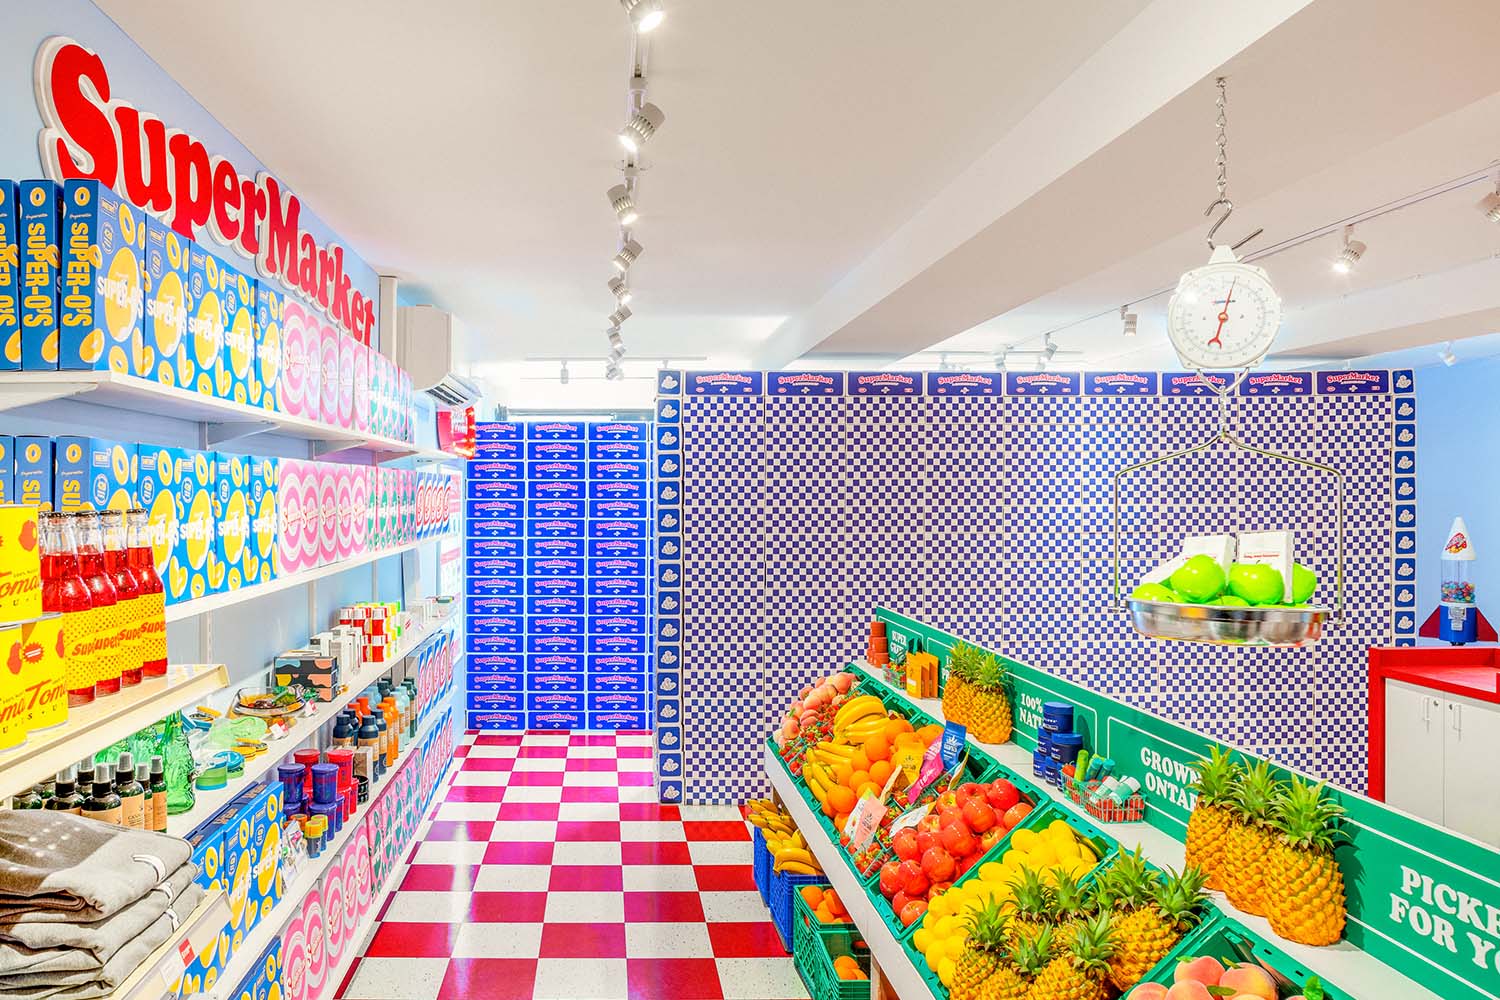 Stackt market in Toronto has transformed into a click and collect